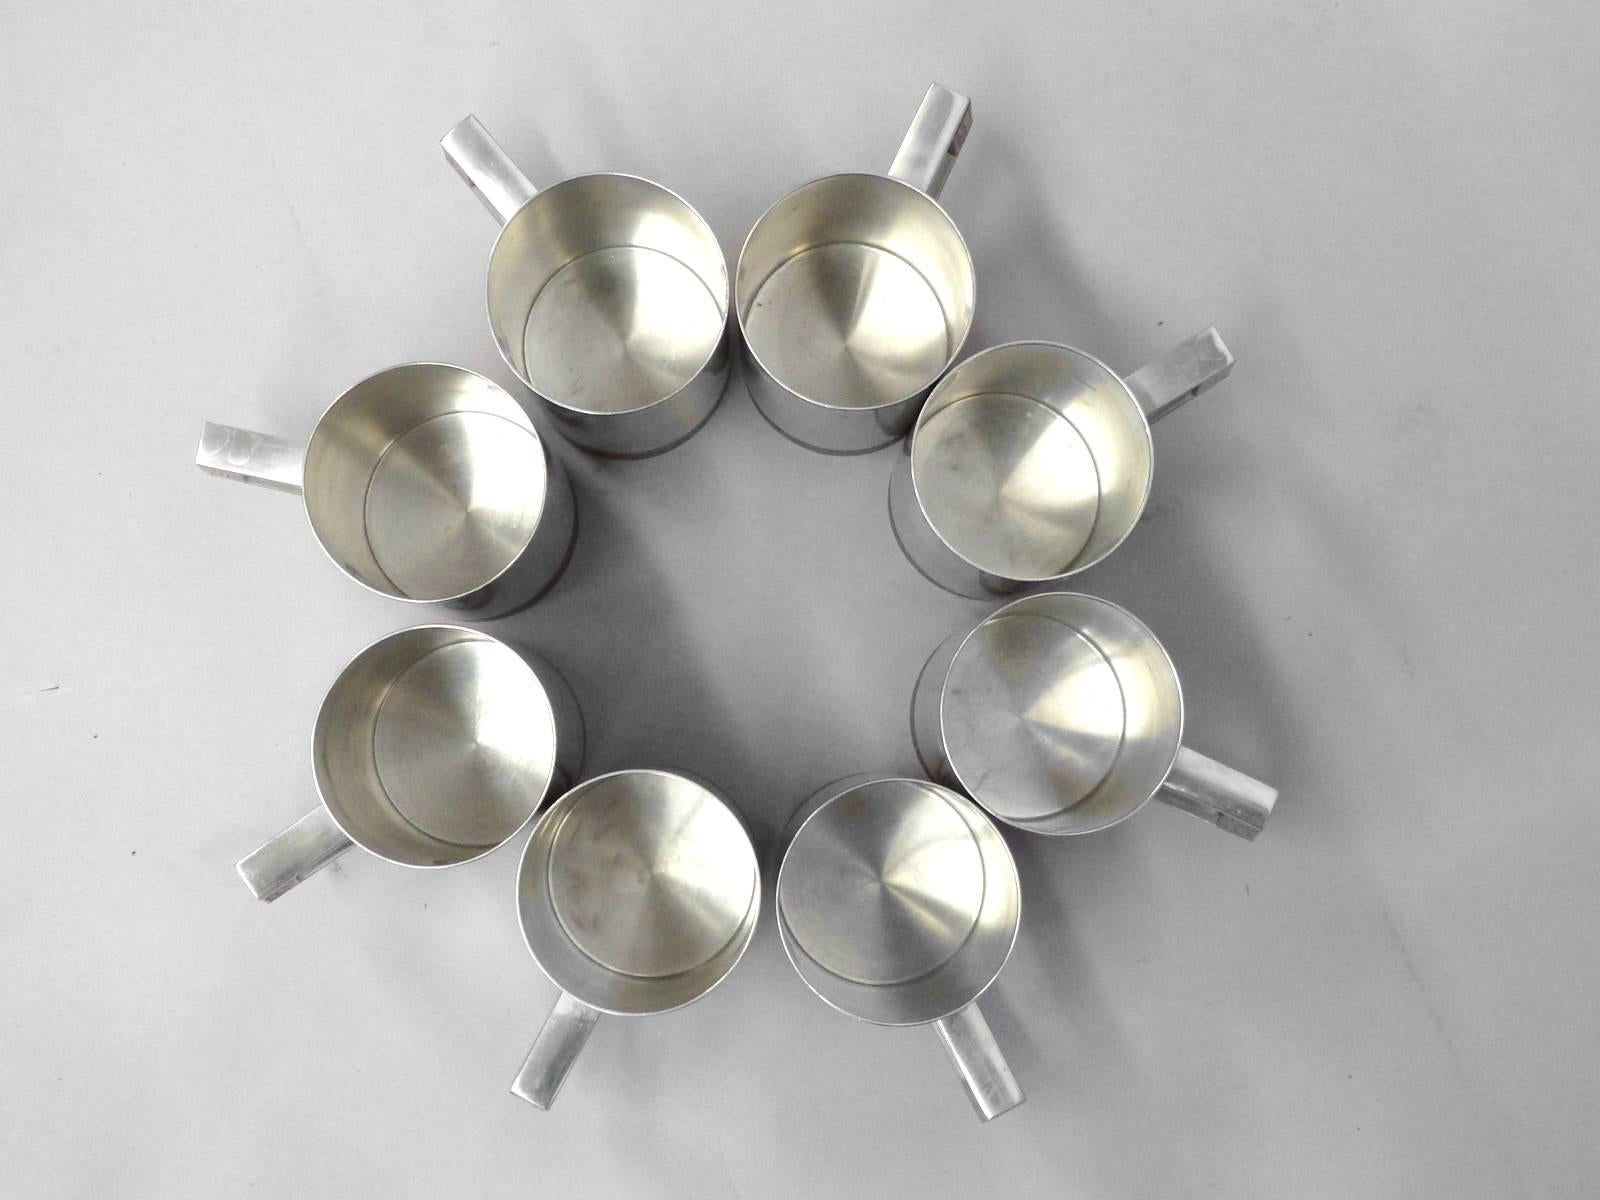 Eight modernist Pewter with teak cups or mugs. Attributed to Jens Quistgaard for Dansk Designs. Perfect for Mocow Mules cocktail .